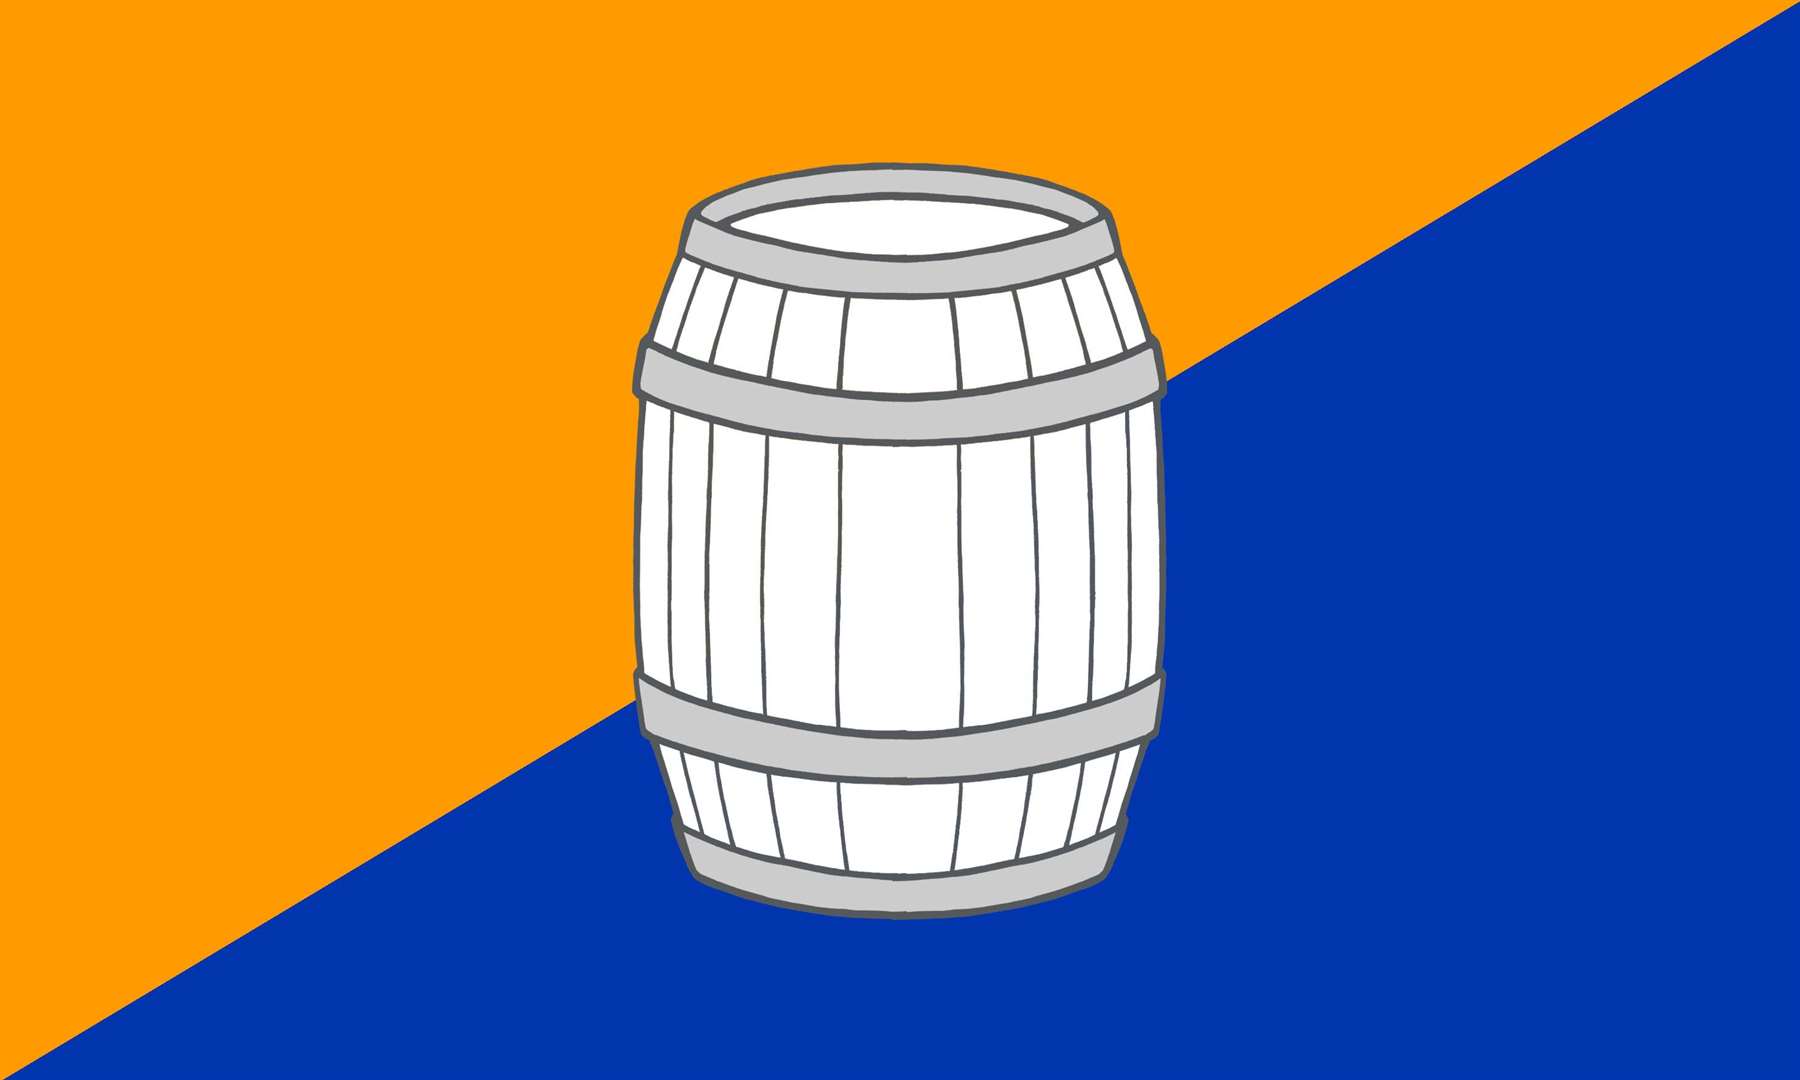 The deep golden colour denotes the whisky industry of the in-land county, while the blue recalls the maritime industries of Banffshire's coast. Over the top is a barrel, an item that was key to both industries across the county from maturing whiskies to storing fish.